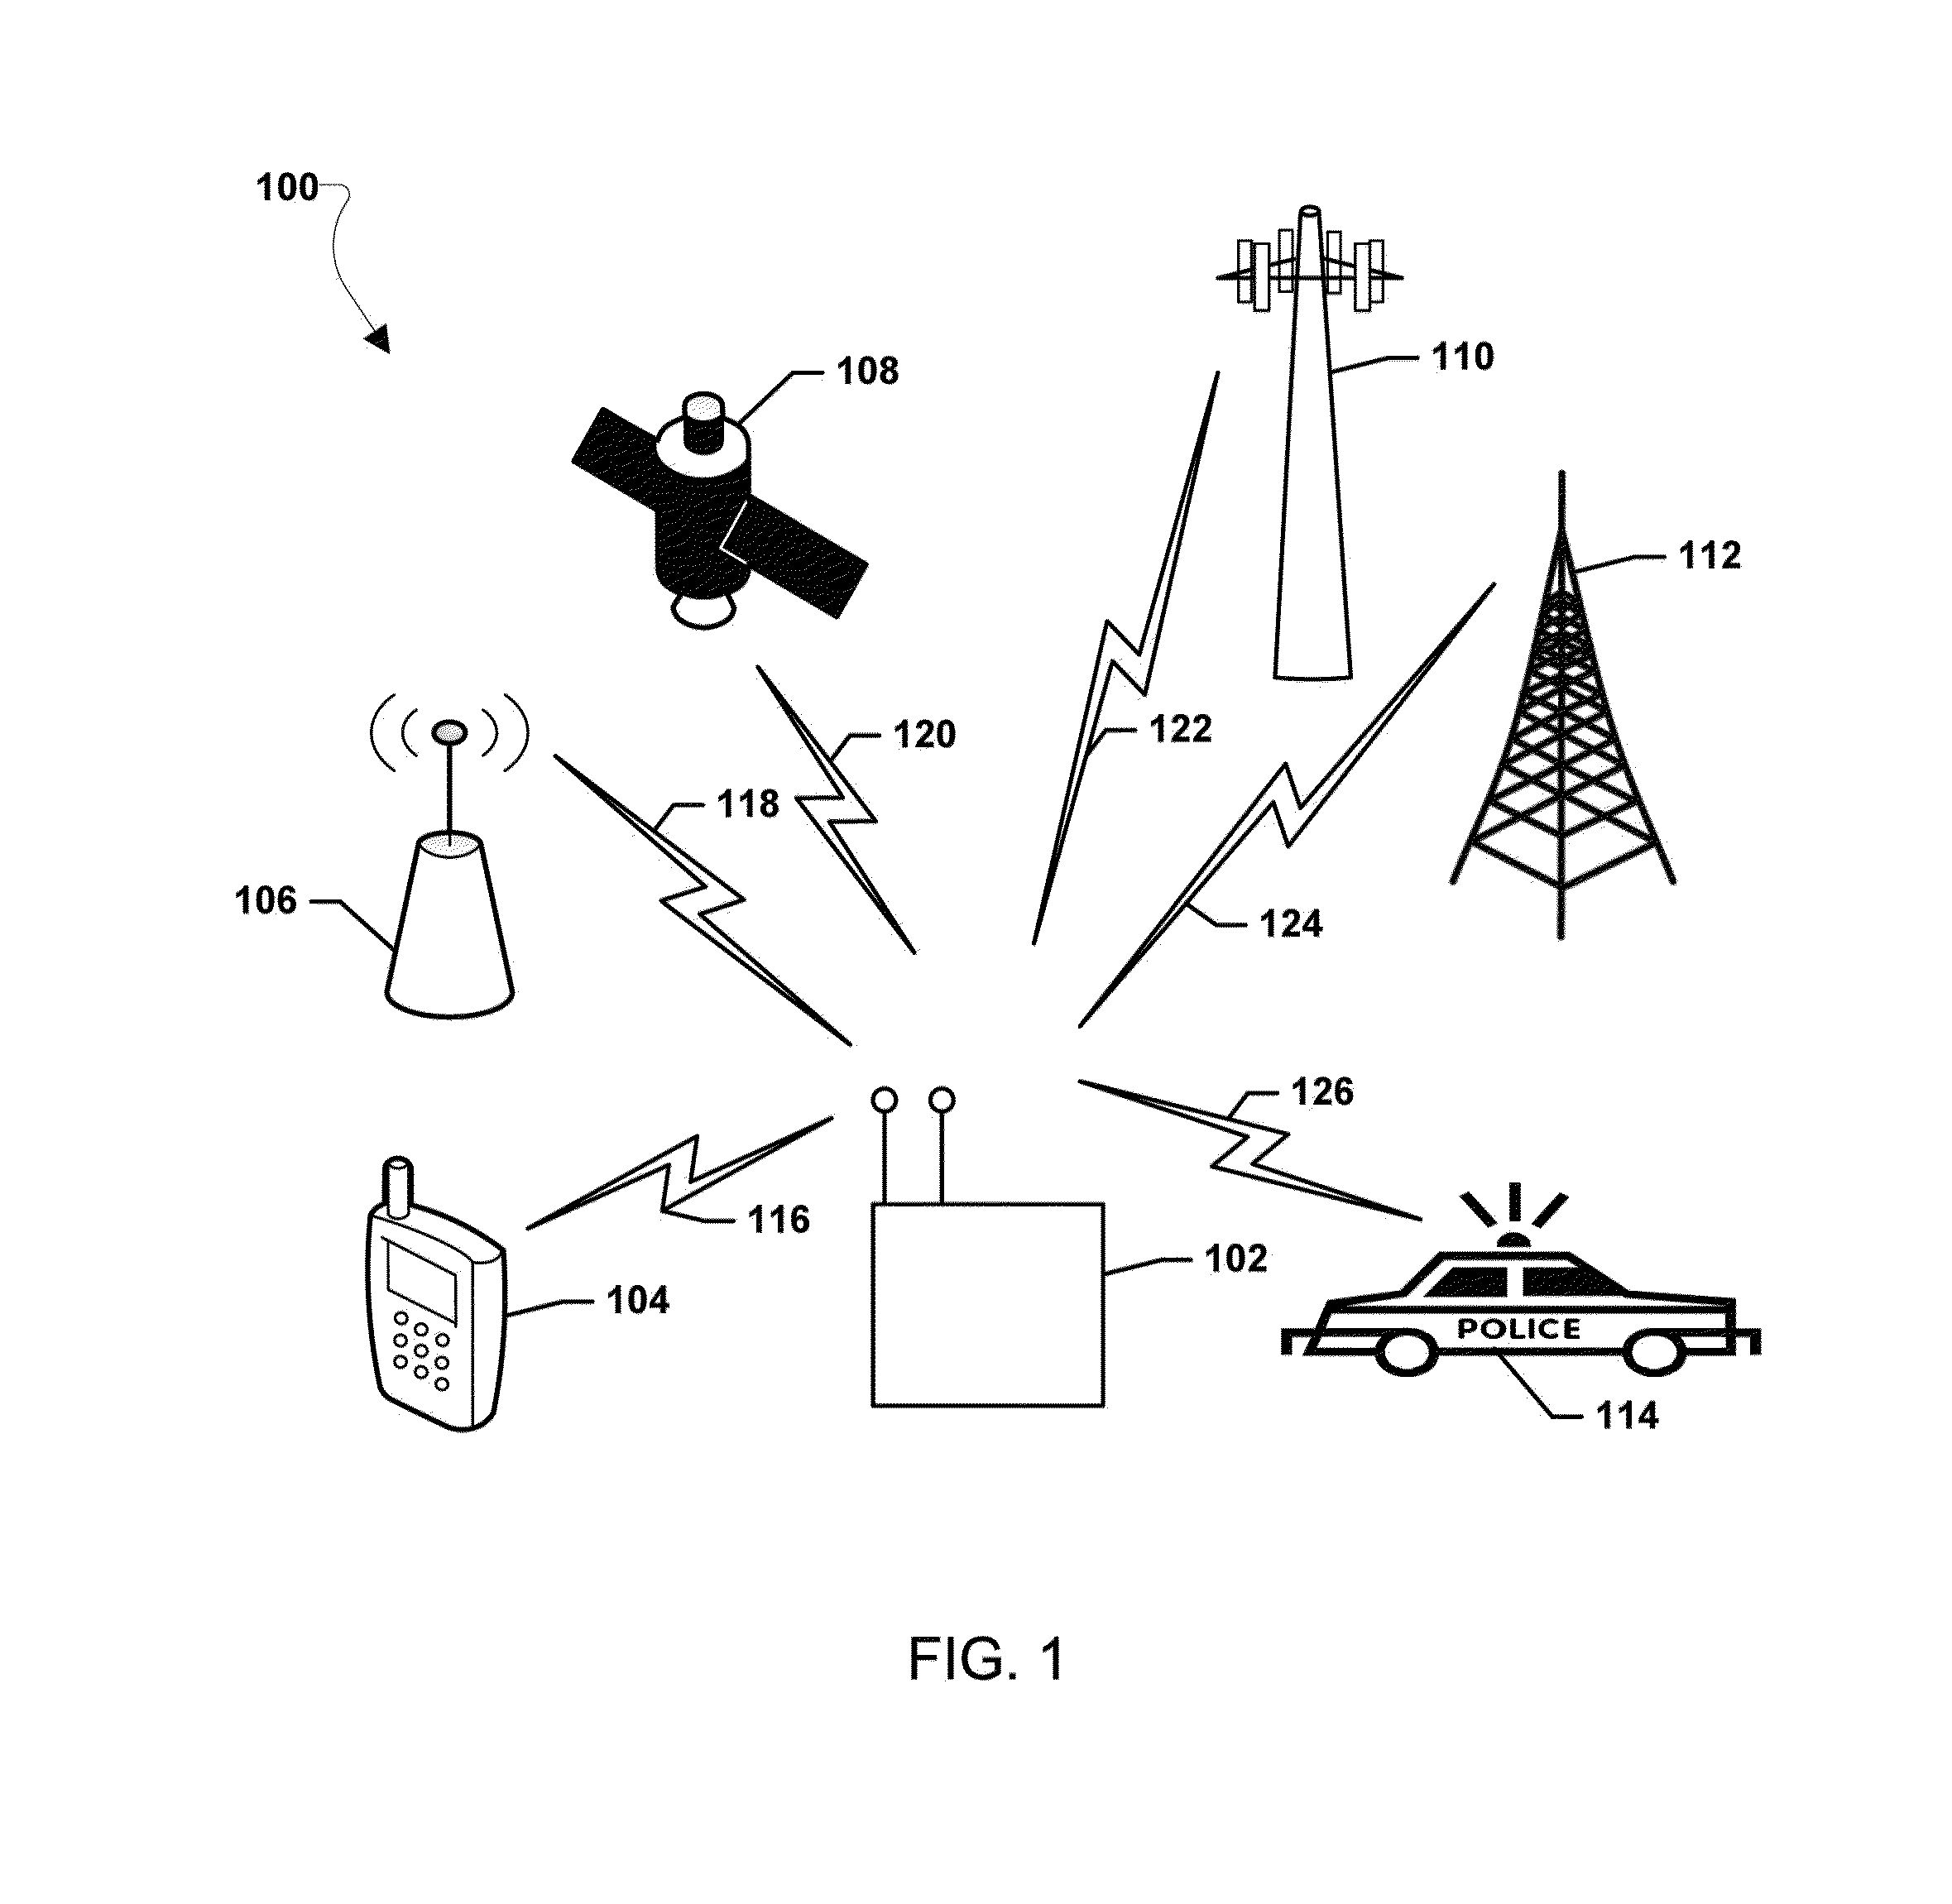 Systems, methods, and devices having databases for electronic spectrum management